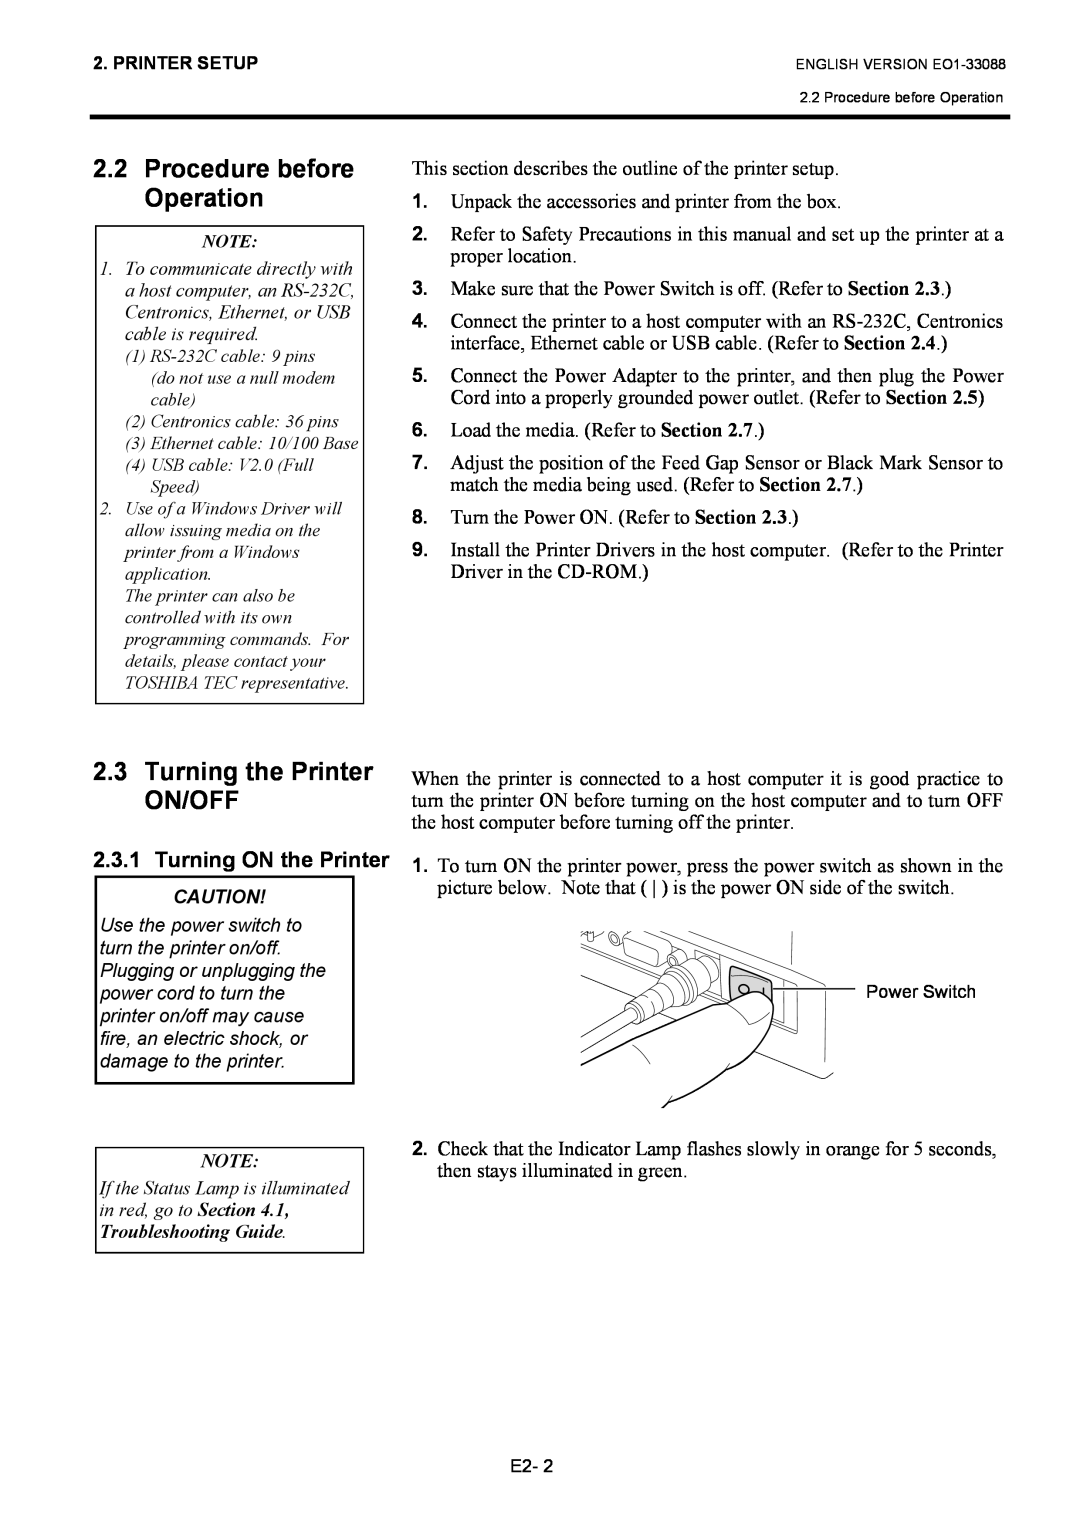 Toshiba B-EV4D SERIES, EO1-33088 owner manual Procedure before Operation, Turning the Printer ON/OFF, Turning ON the Printer 